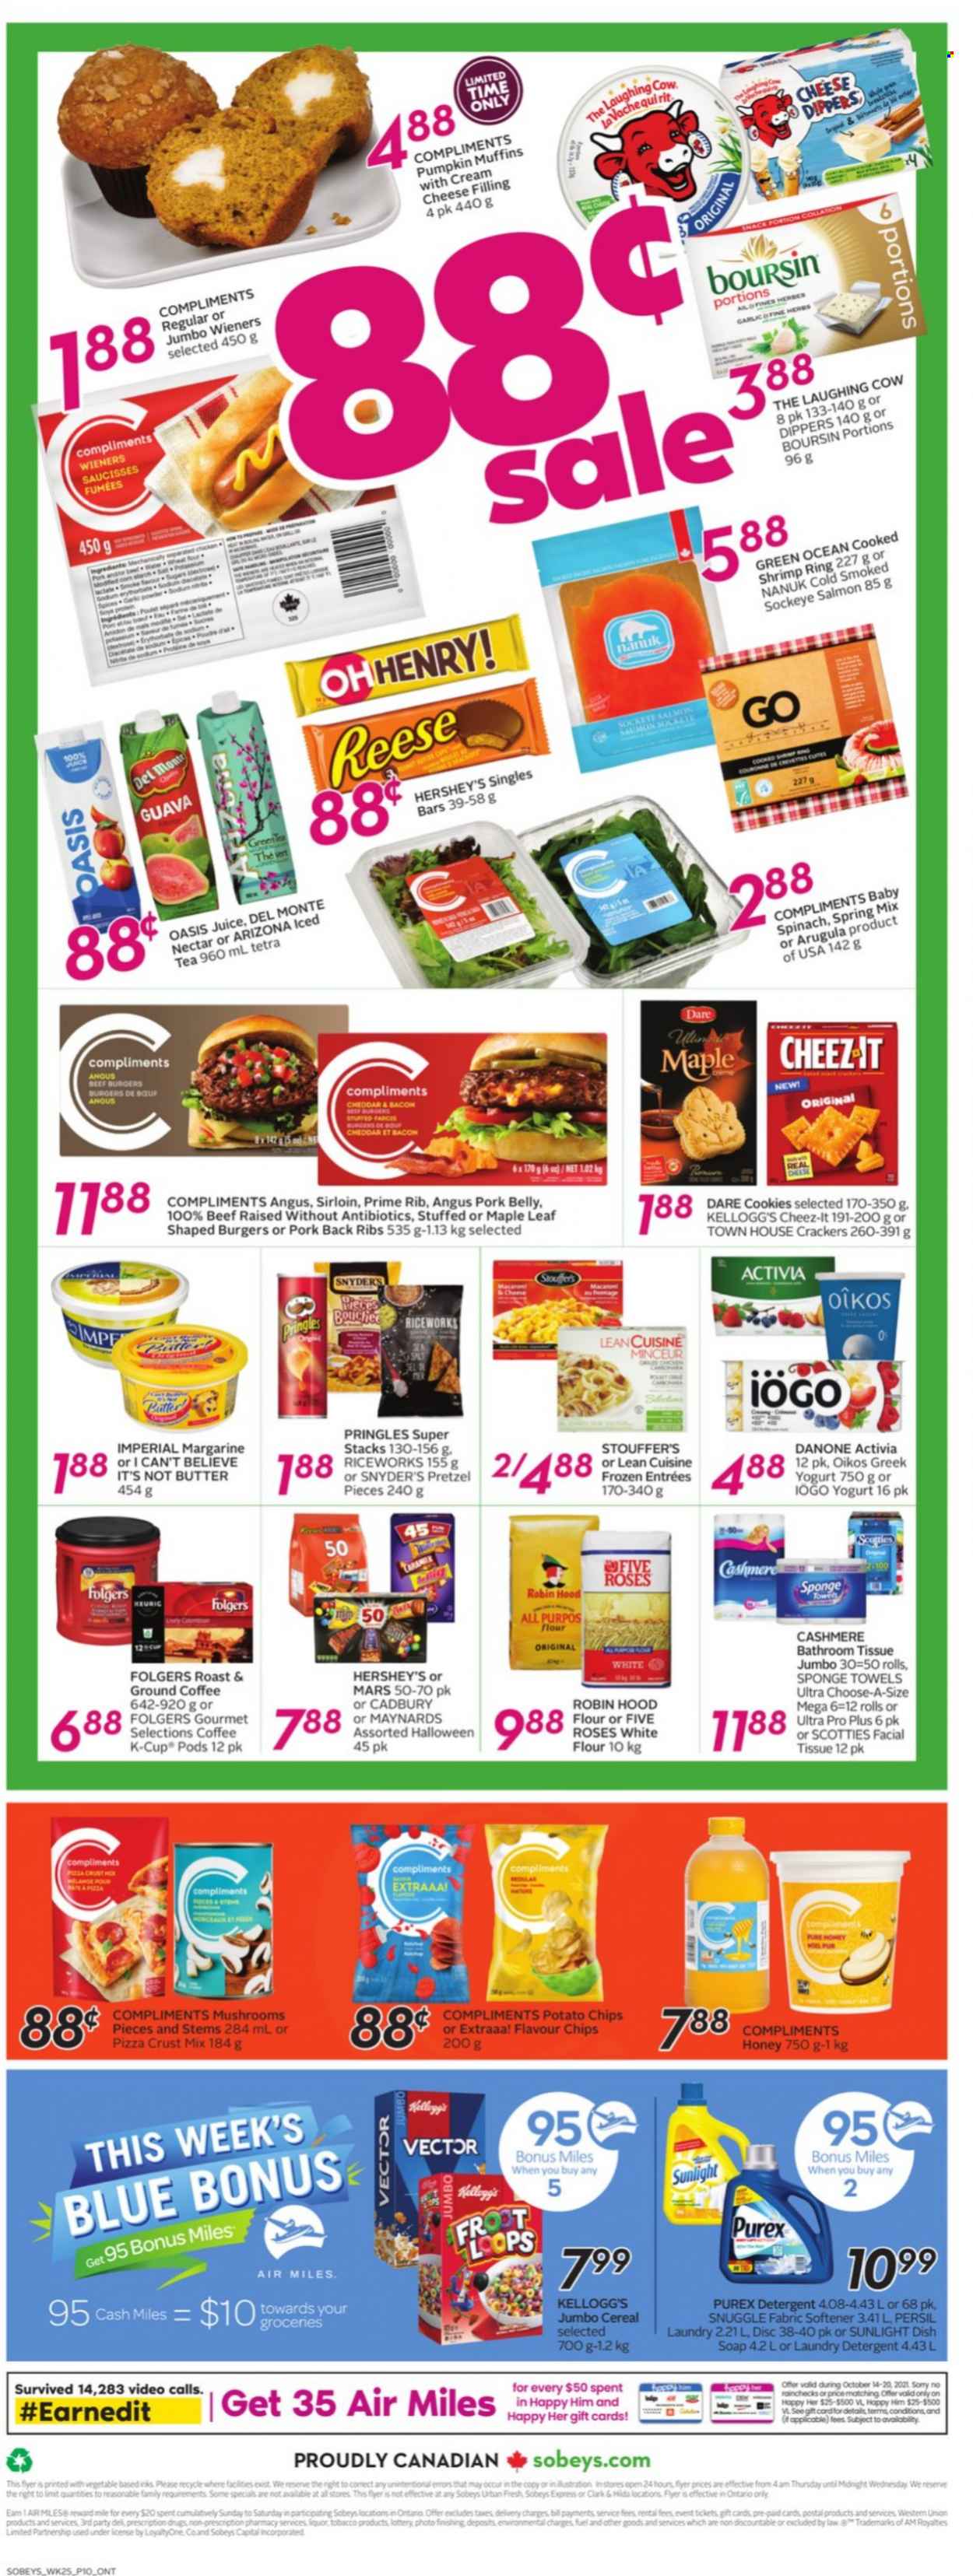 thumbnail - Sobeys Flyer - October 14, 2021 - October 20, 2021 - Sales products - pretzels, muffin, pumpkin, guava, cod, salmon, shrimps, pizza, hamburger, beef burger, Lean Cuisine, bacon, The Laughing Cow, greek yoghurt, yoghurt, Activia, Oikos, butter, margarine, I Can't Believe It's Not Butter, Hershey's, Stouffer's, cookies, snack, Mars, crackers, Kellogg's, Cadbury, potato chips, Pringles, Cheez-It, flour, cereals, honey, juice, ice tea, AriZona, coffee, Folgers, ground coffee, coffee capsules, L'Or, K-Cups, pork belly, pork meat, pork ribs, pork back ribs, bath tissue, Snuggle, Persil, fabric softener, laundry detergent, Sunlight, Purex, soap, Danone, detergent. Page 2.